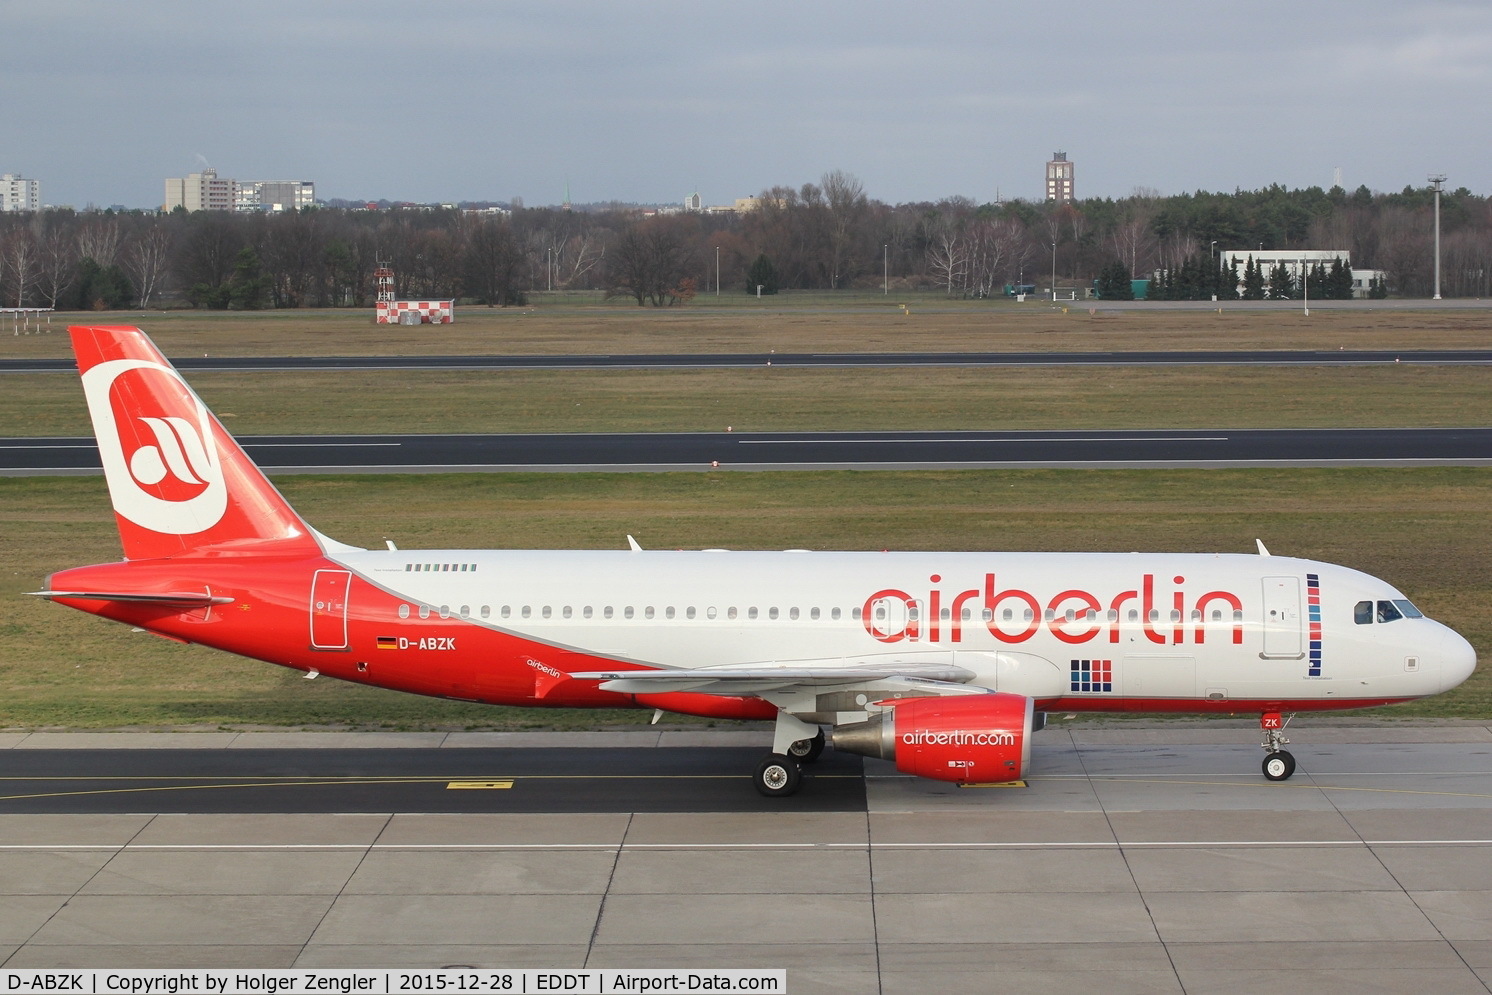 D-ABZK, 2007 Airbus A320-216 C/N 3213, Science of colors: AB is testing new colors on their jets for the time after TXL...